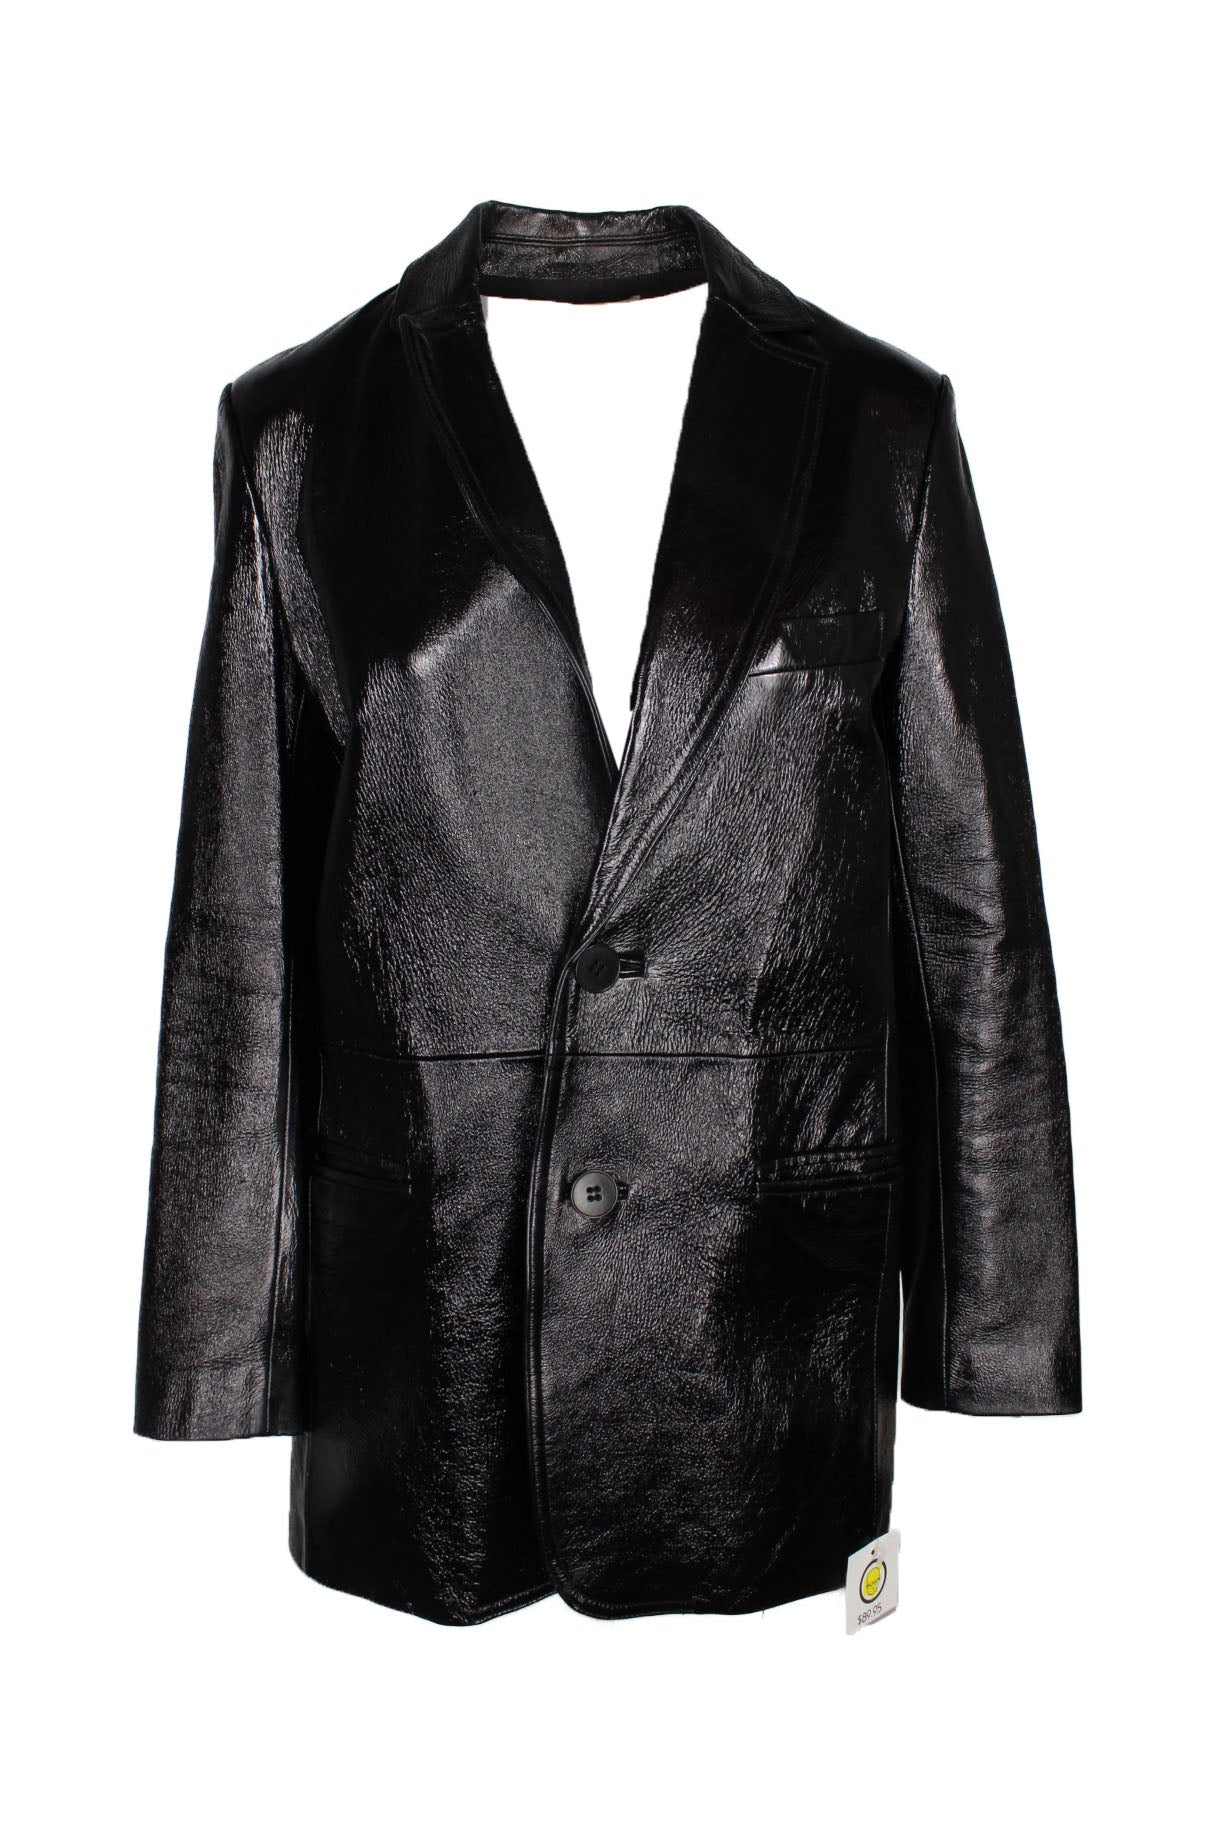 tibi black leather jacket. features button closure details and deep set in pocket details.